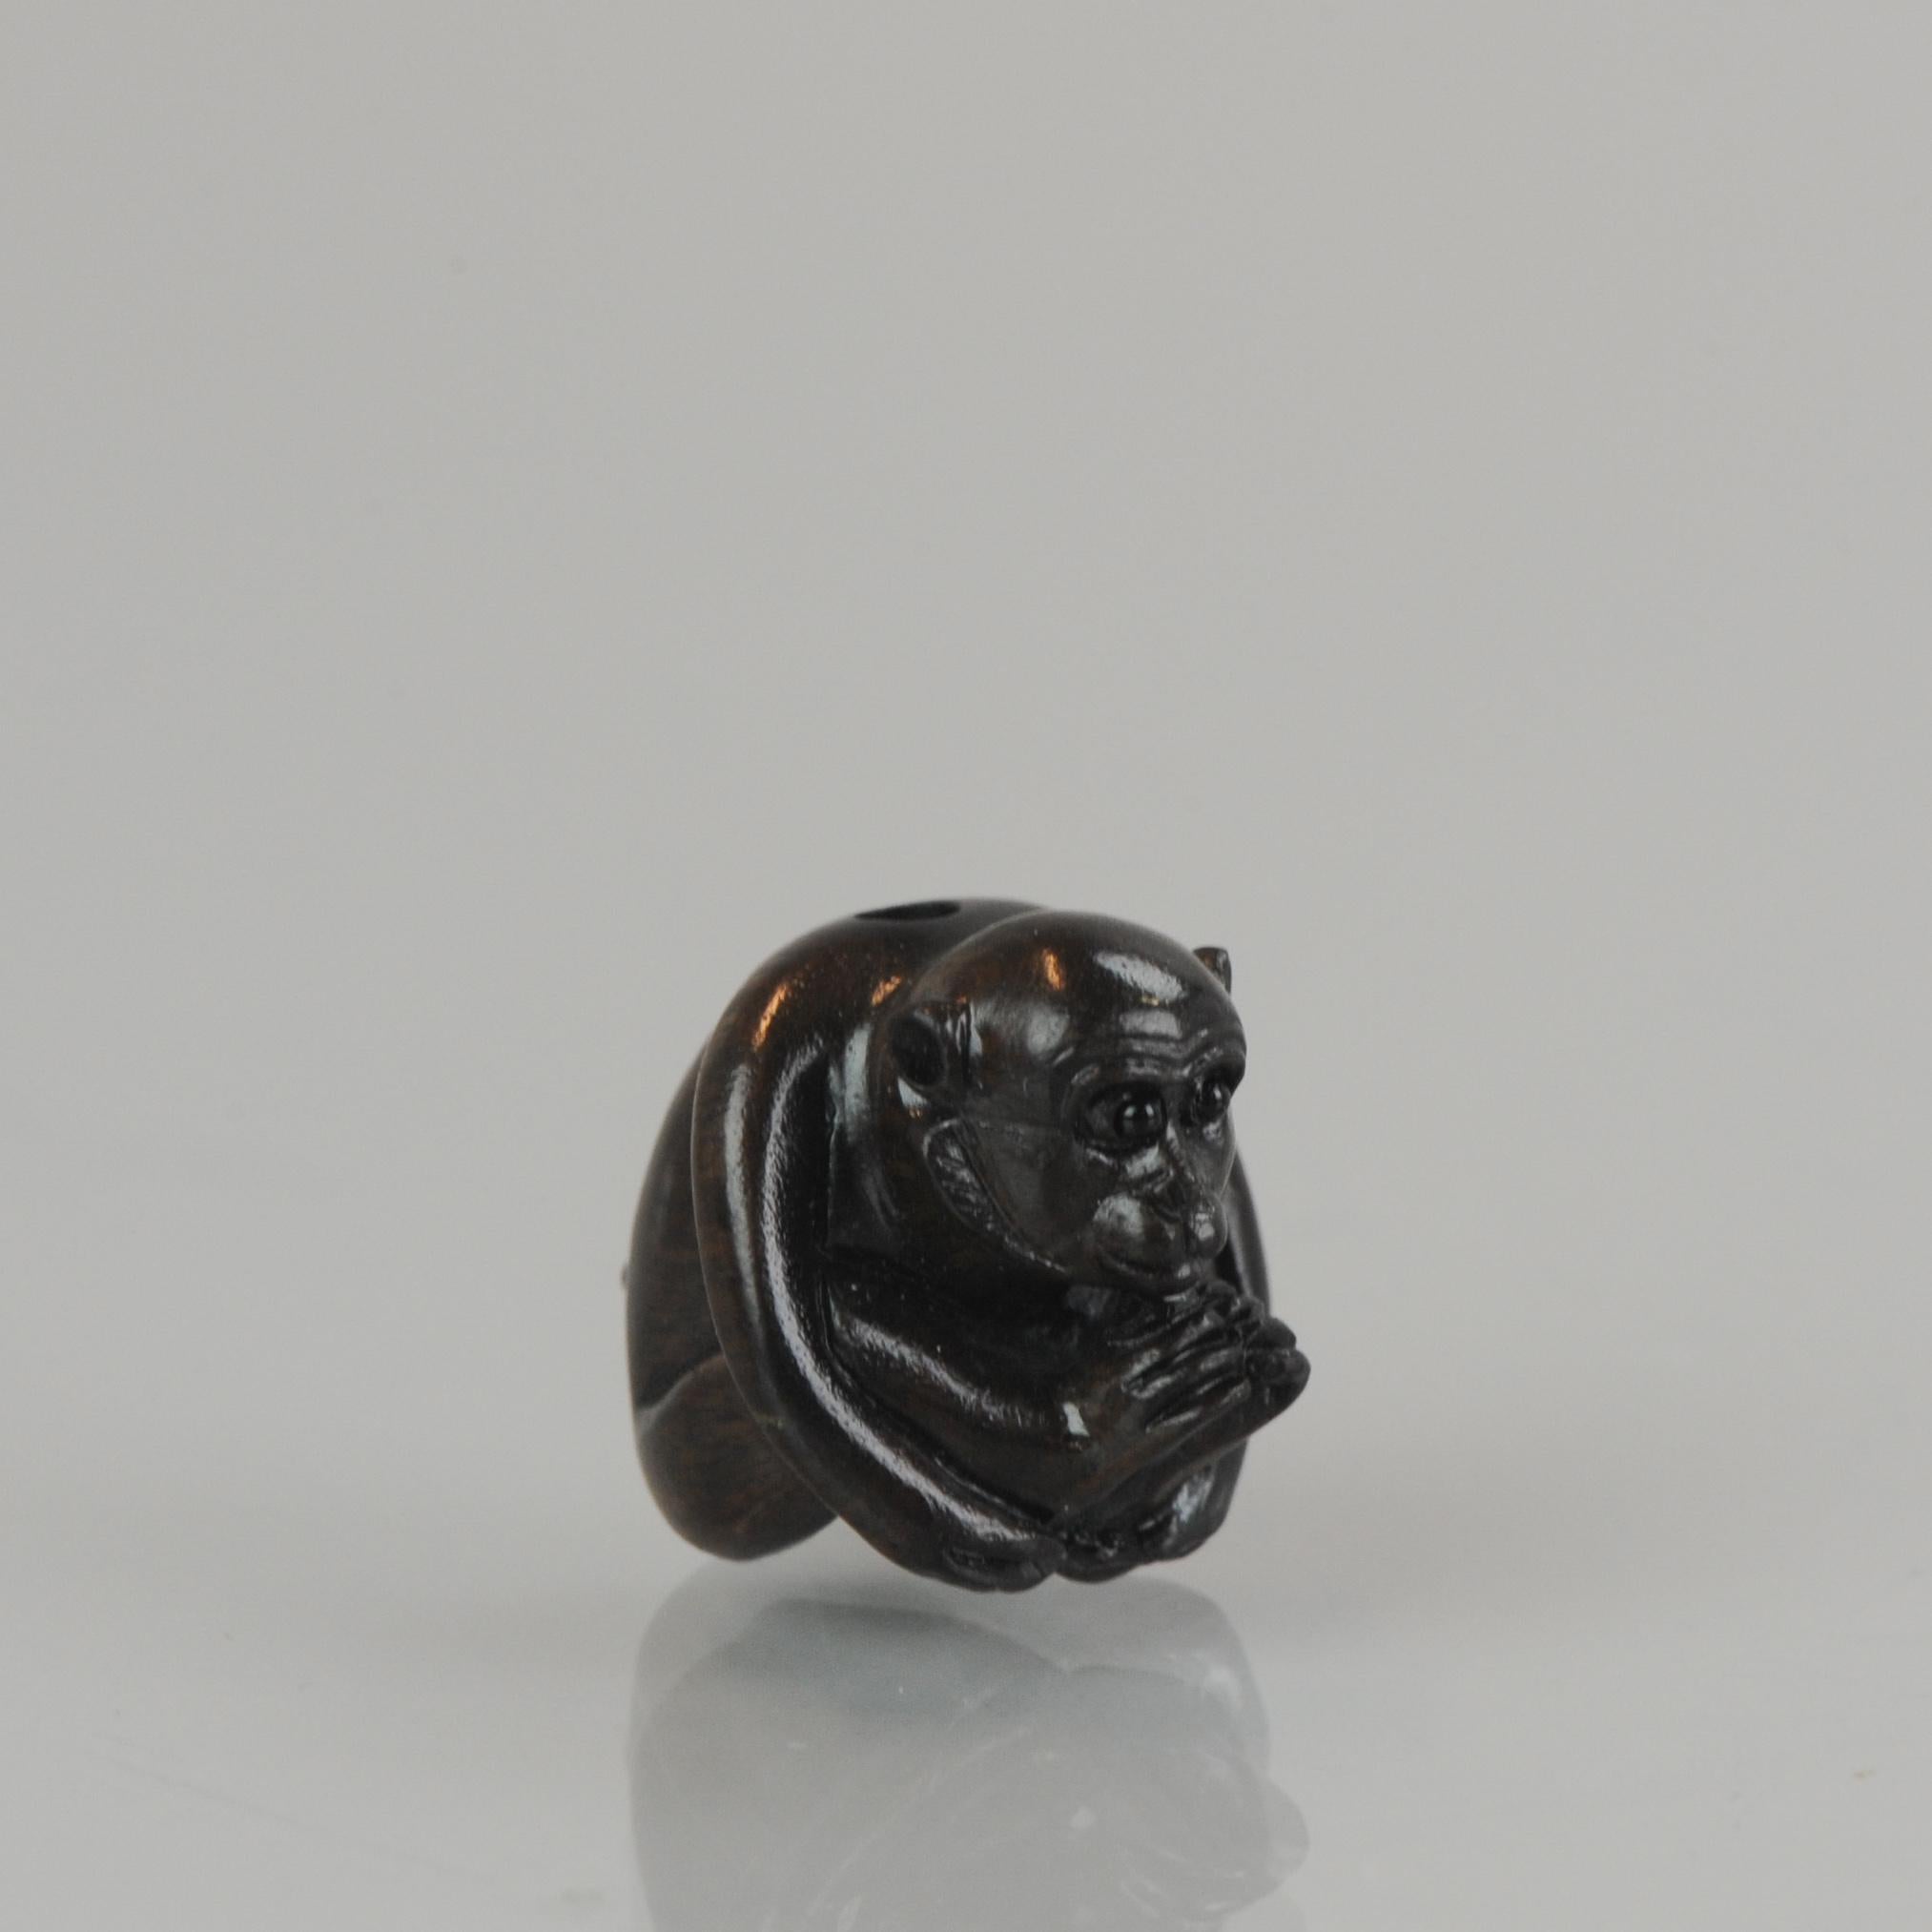 Lovely and very detailed piece. Signed Masakazu

A monkey sitting. Measures: H. 1.5 cm x 3cm, Japan, 19th century.

Condition
Overall condition very nice. Ca 1.5cm high

Period
Meiji Periode (1867-1912).

 